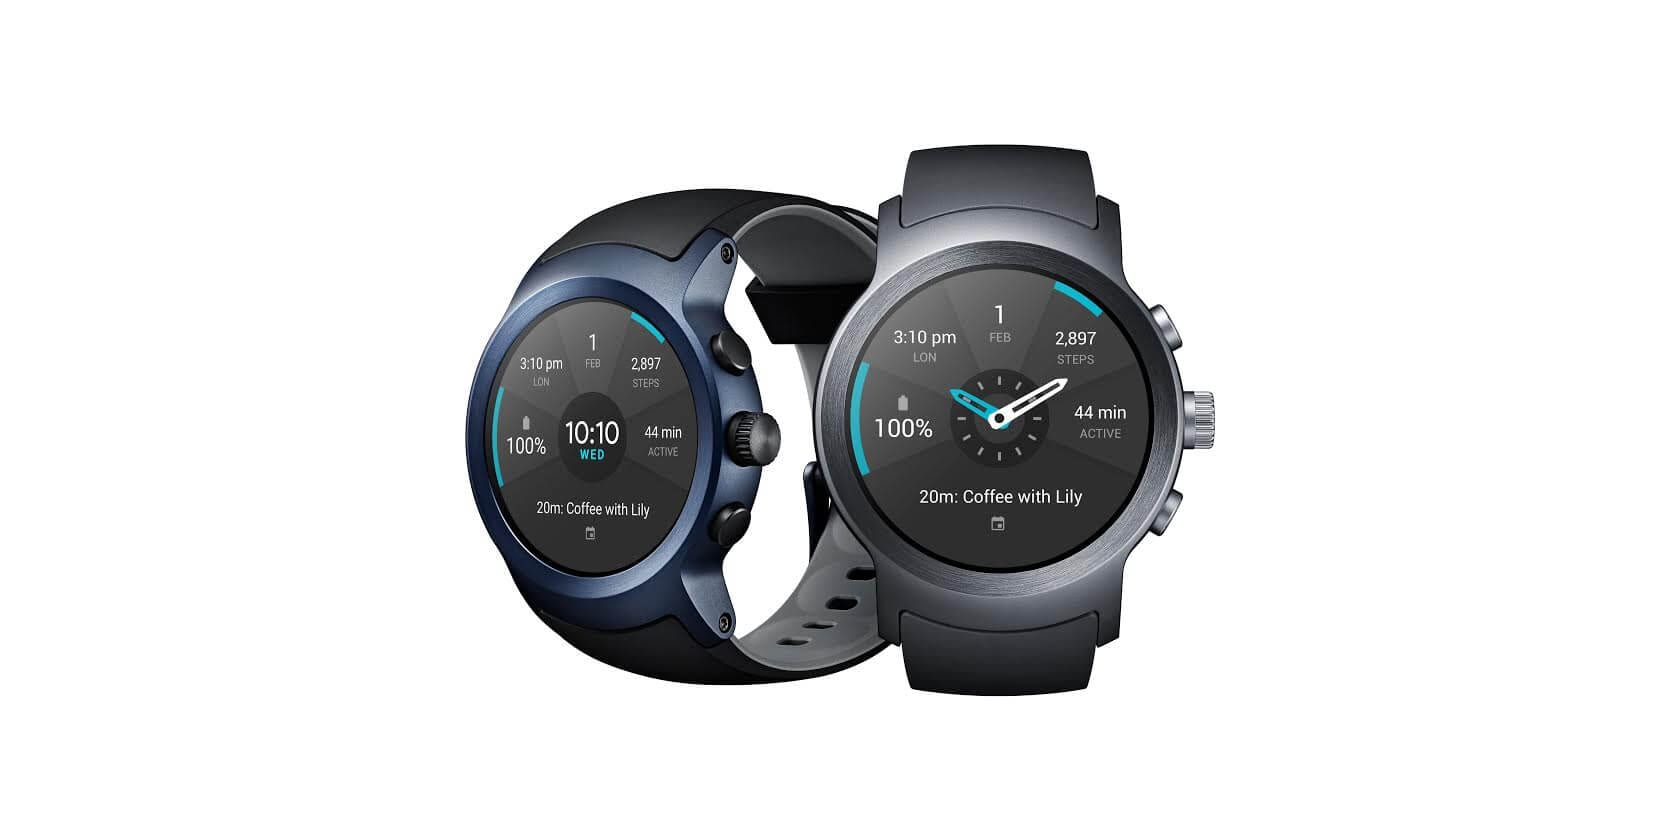 LG smartwatch android wear 2